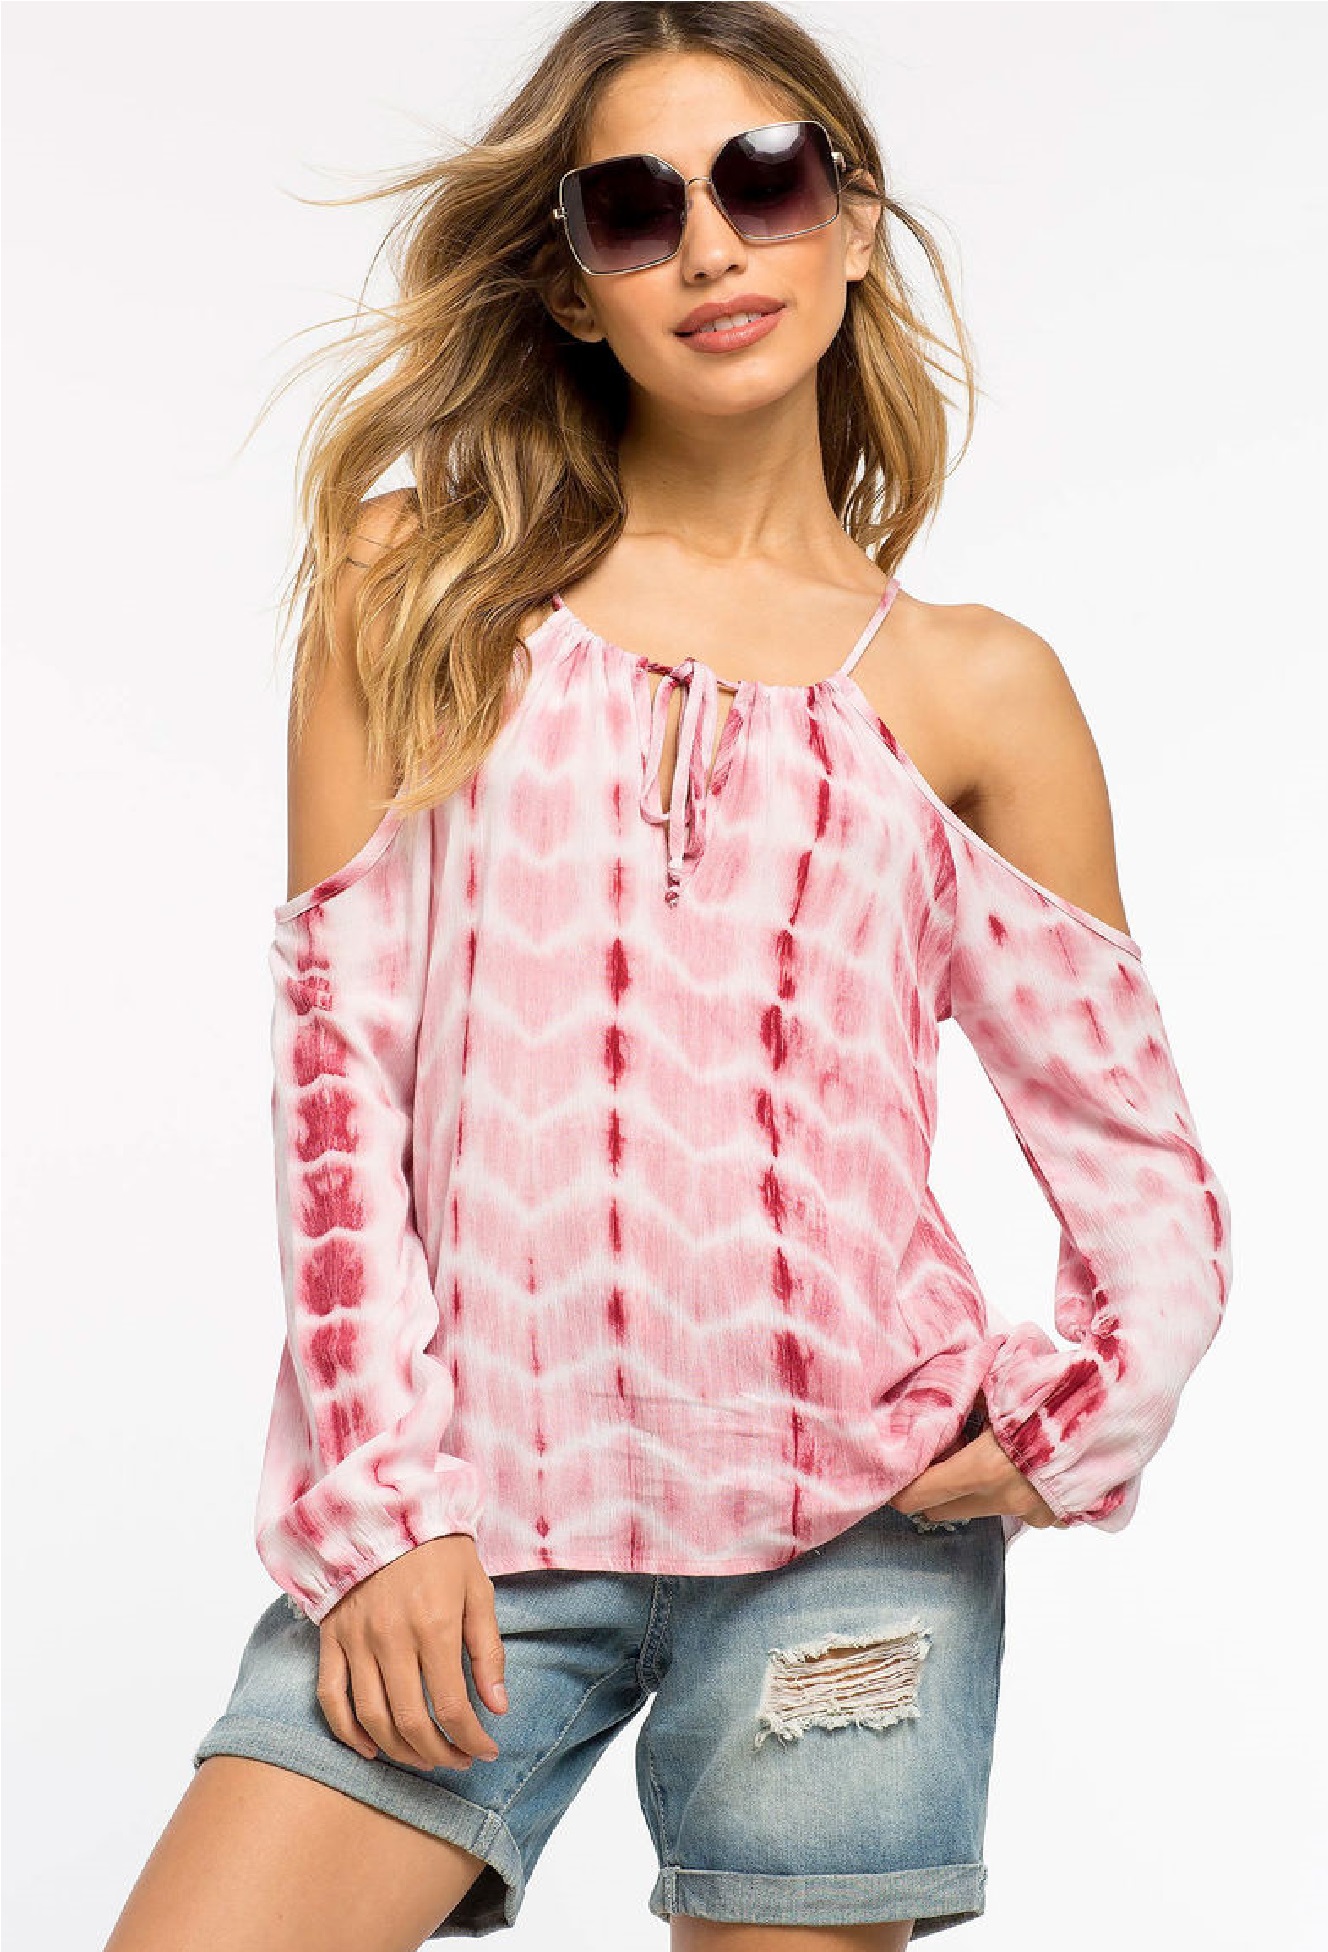 Buy Tie Dye Cold Shoulder Top Pink Online @ ₹699 from ShopClues